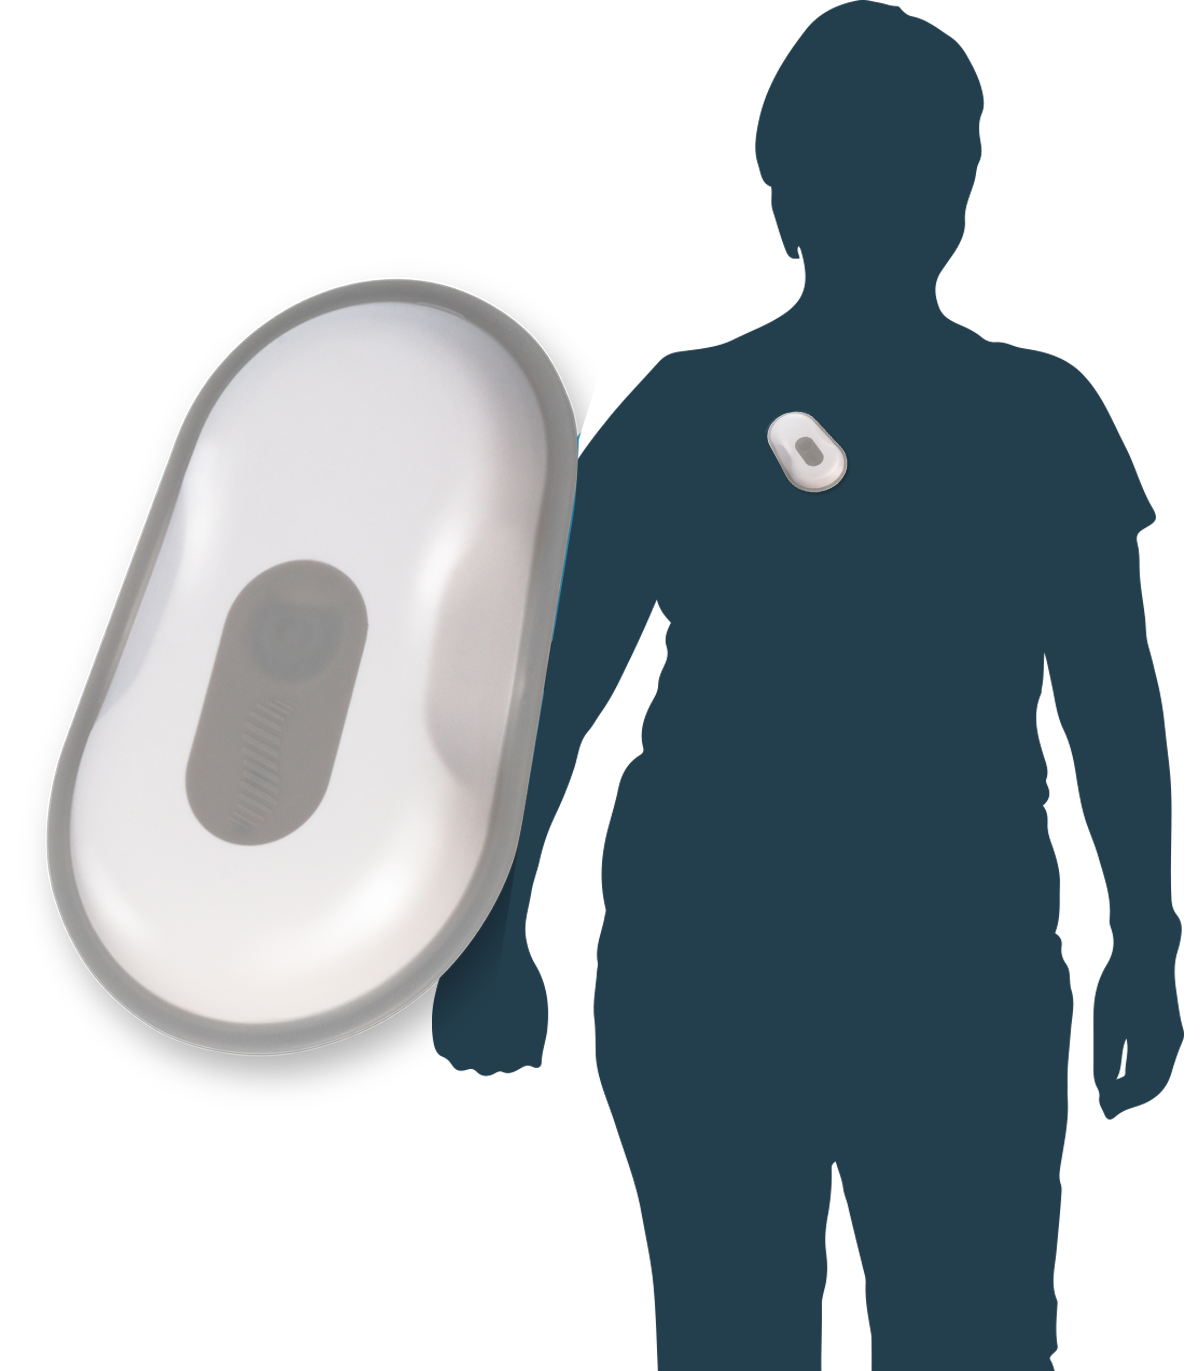 Cough monitoring device Strados on silhouette of patient